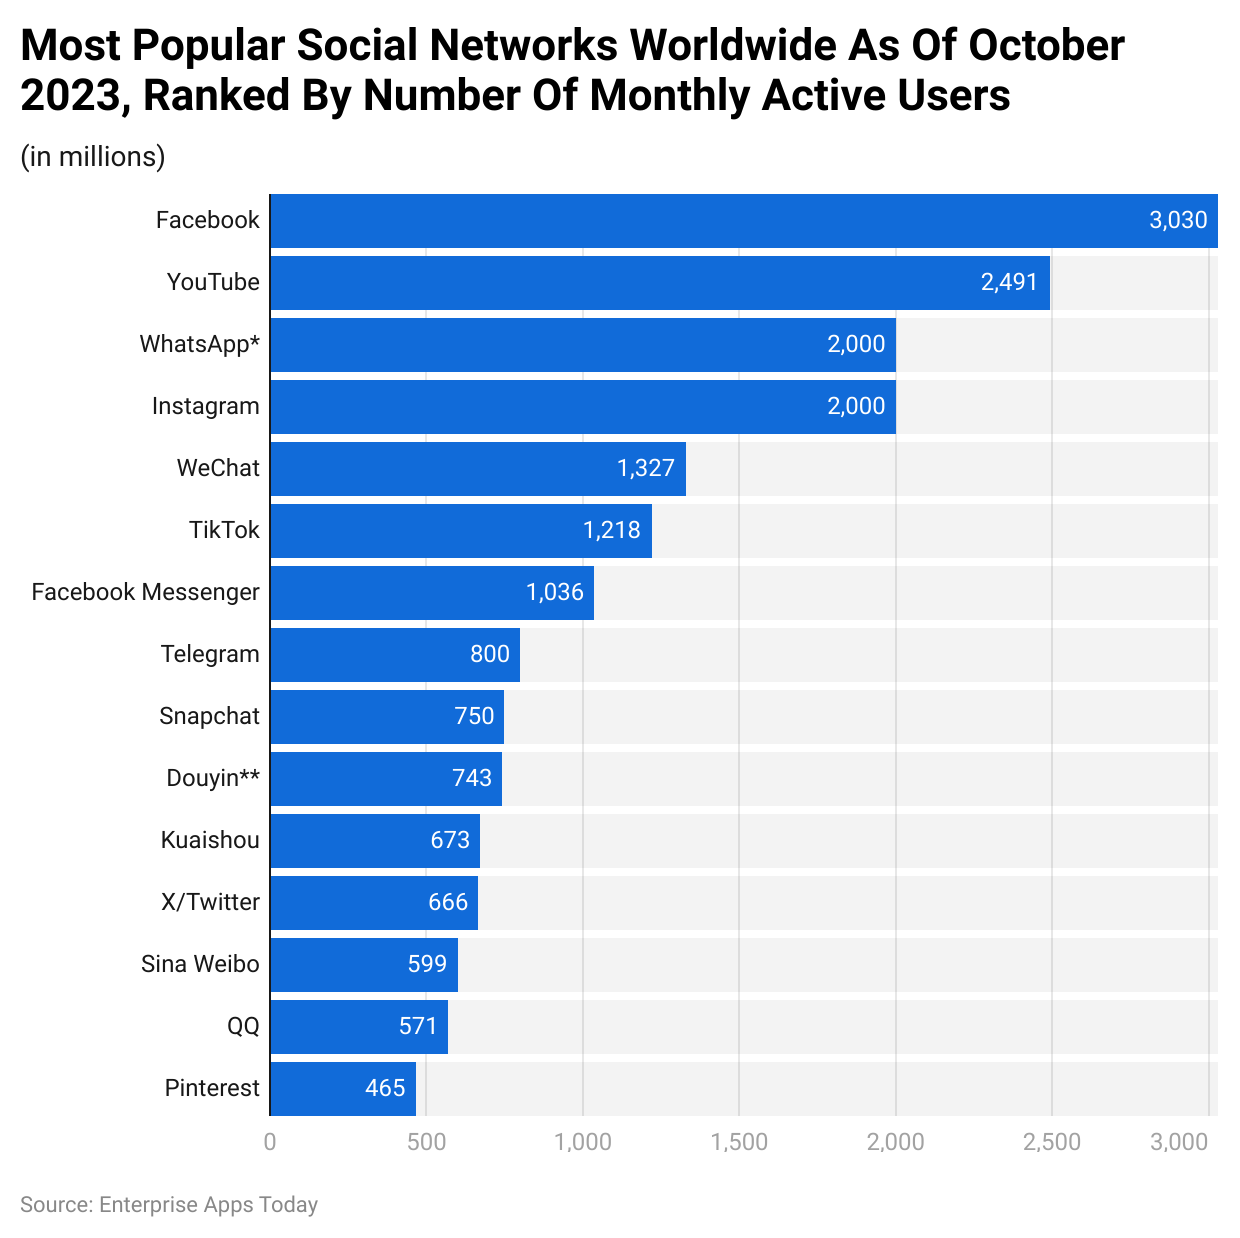 Most popular social networks worldwide as of October 2023, ranked by number of monthly active users